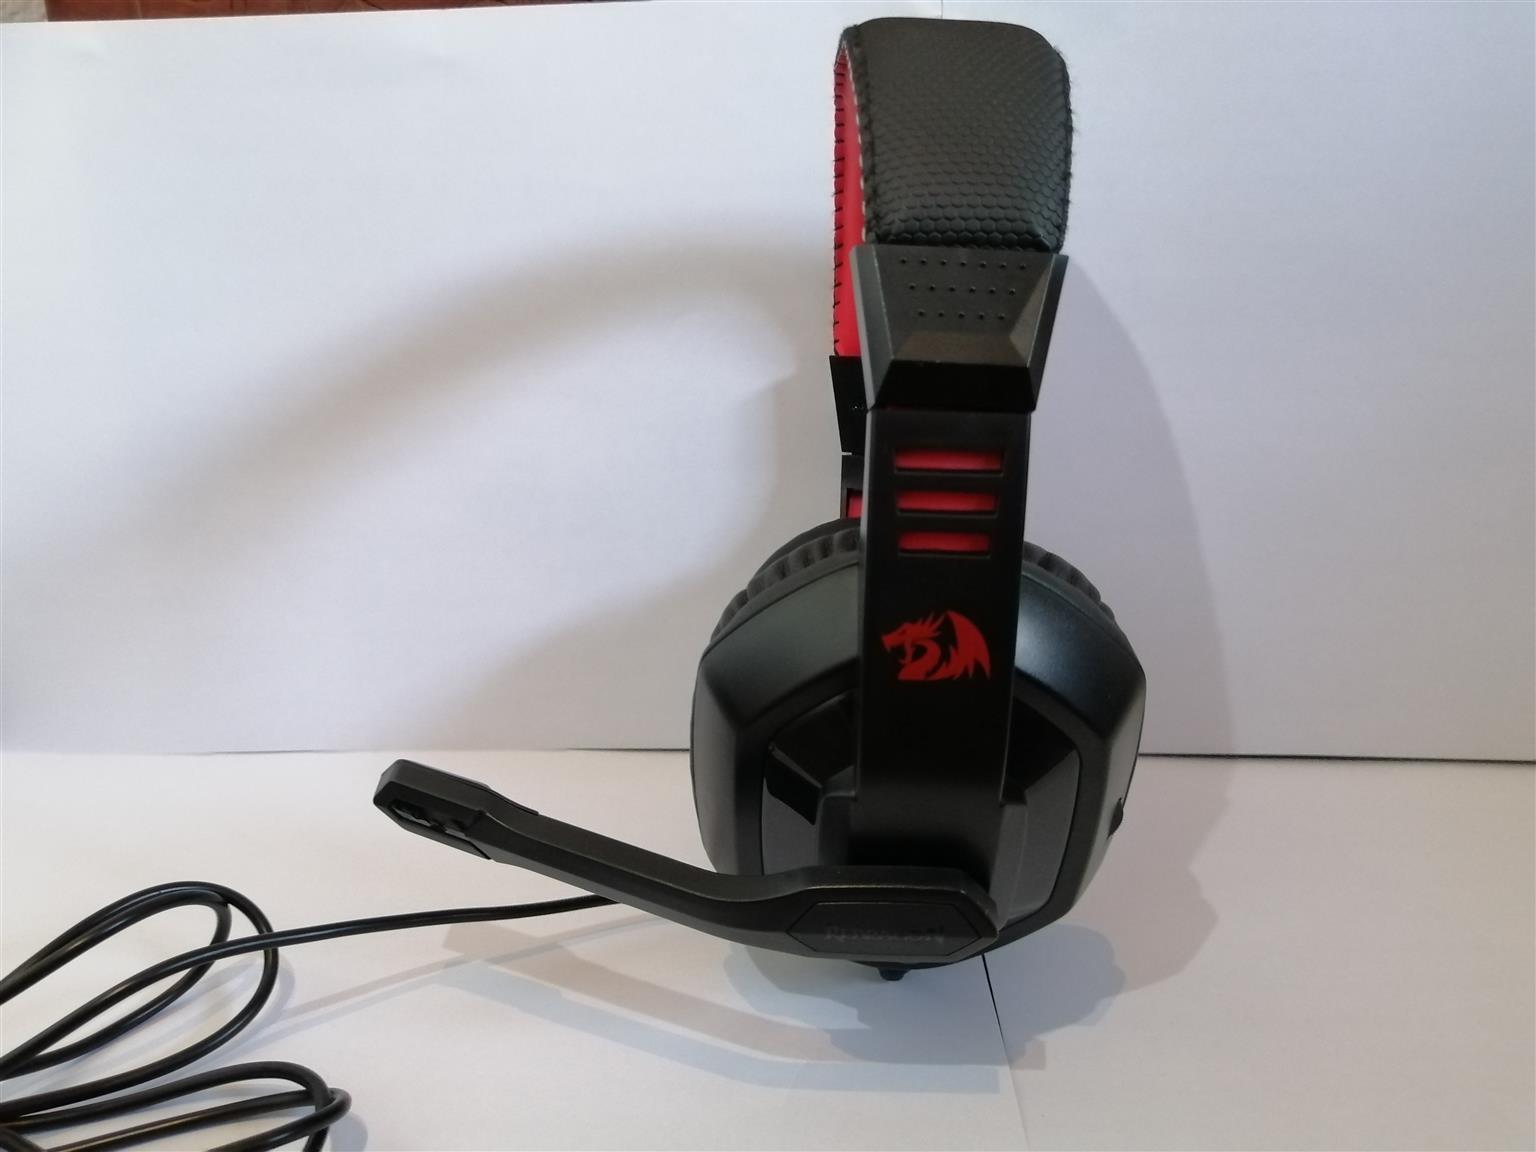 Brand new gaming headset, never used for sale !